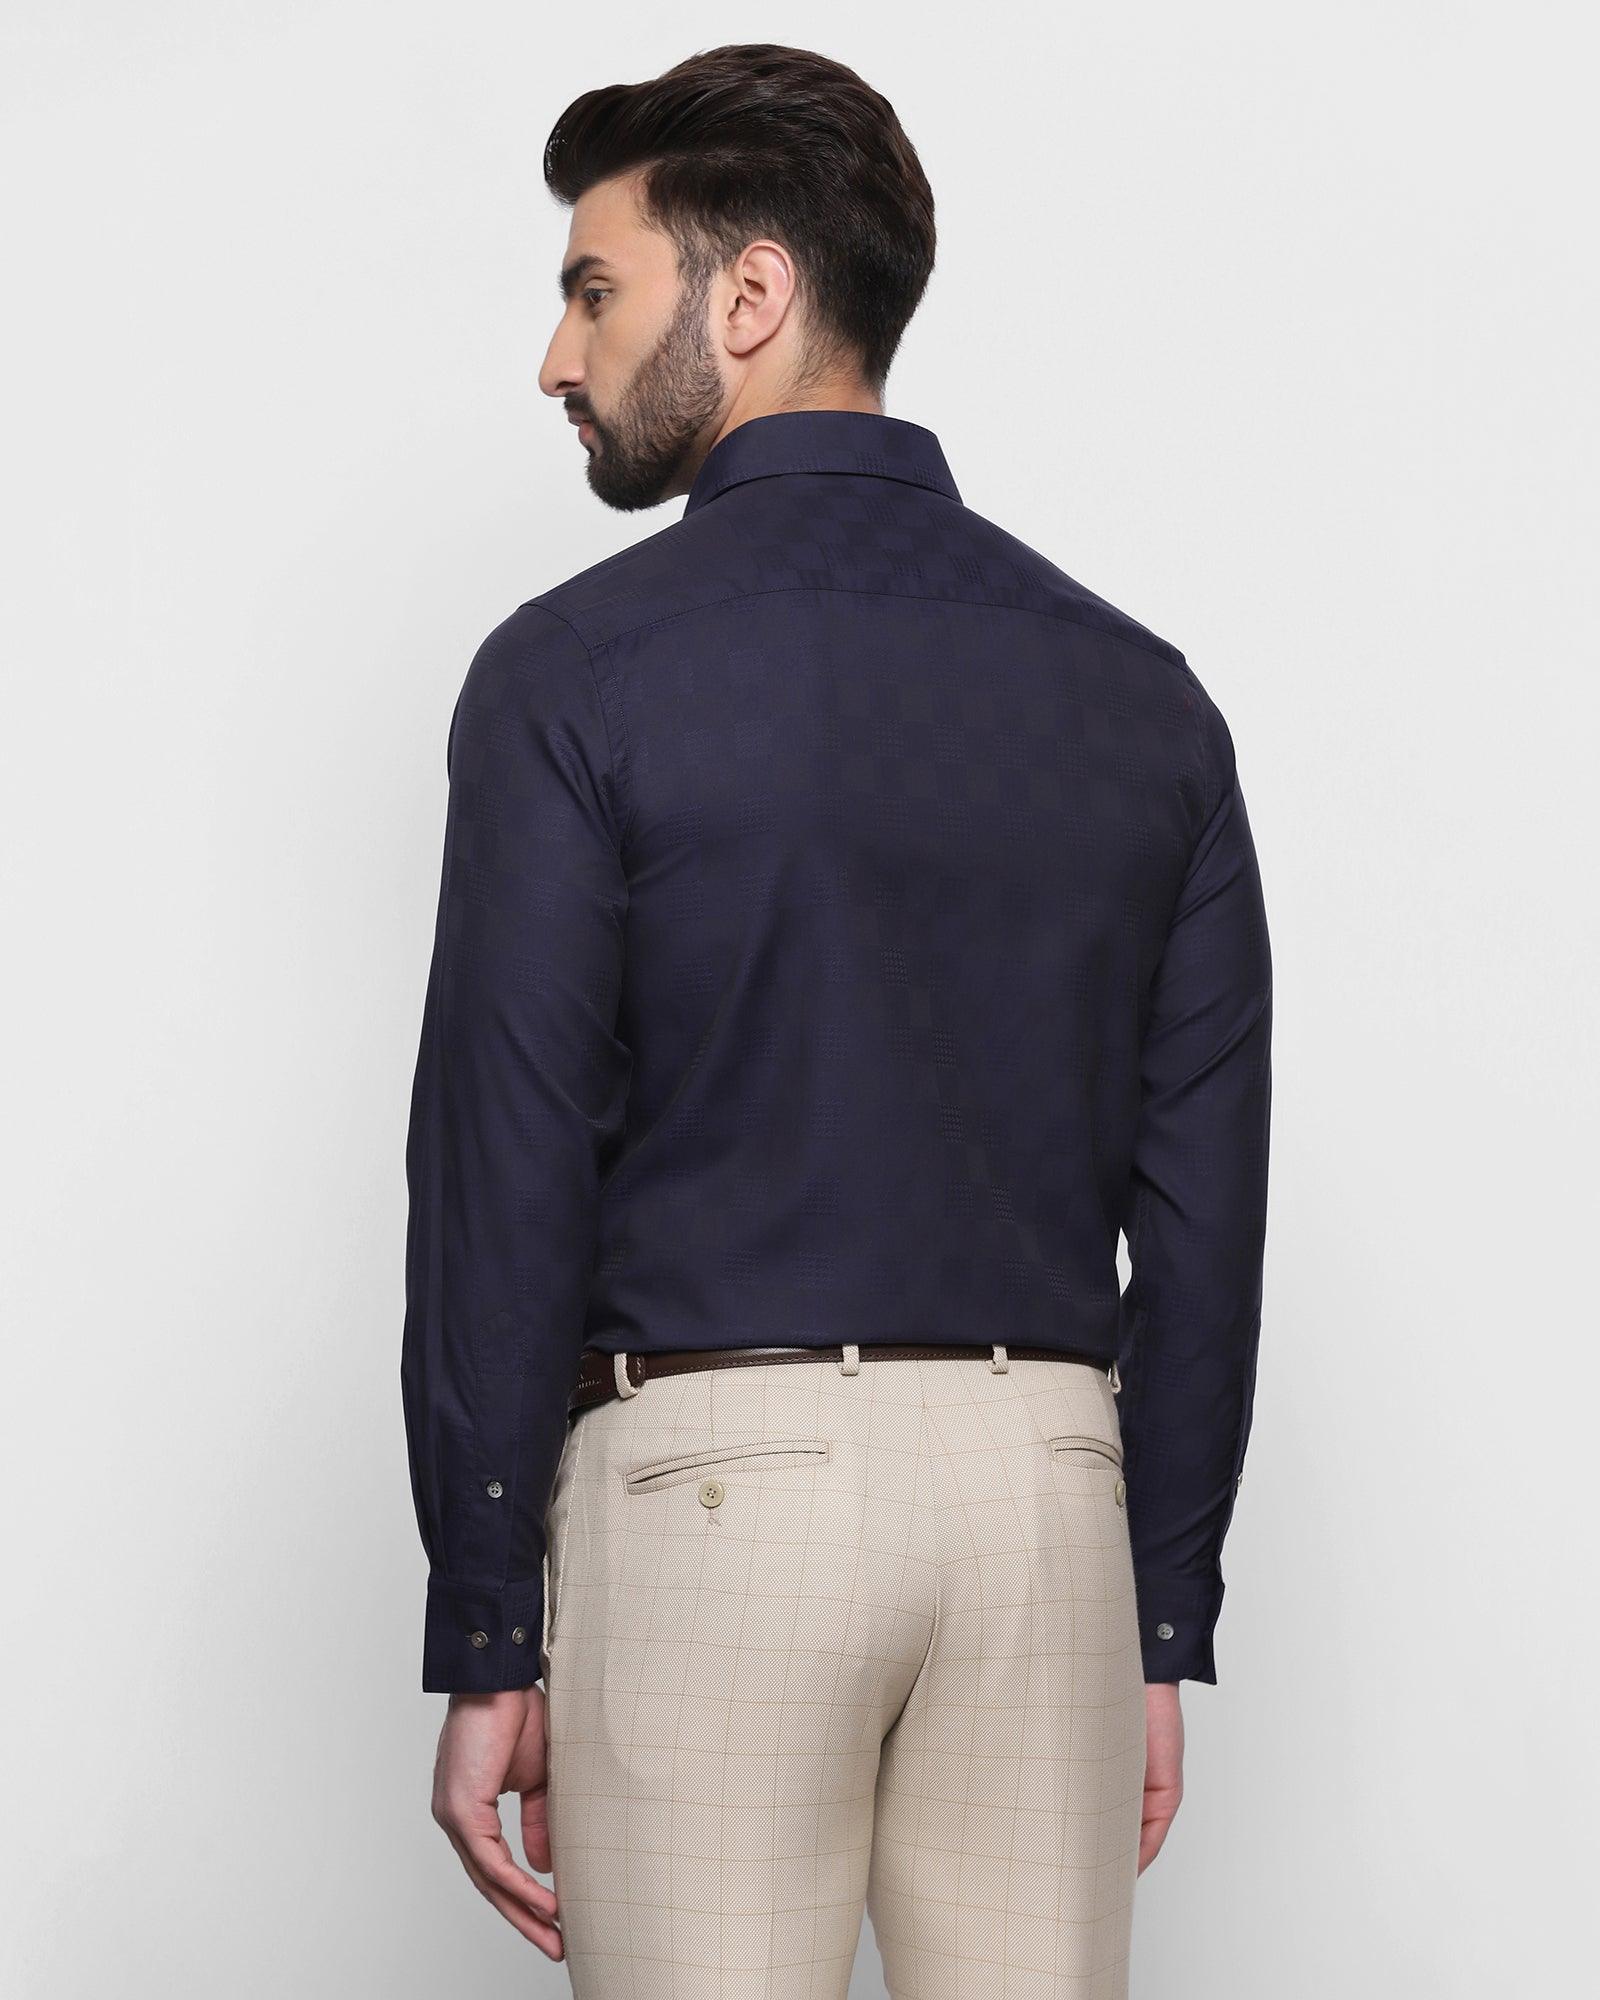 Buy Dior Mens Shirt Online In India -  India